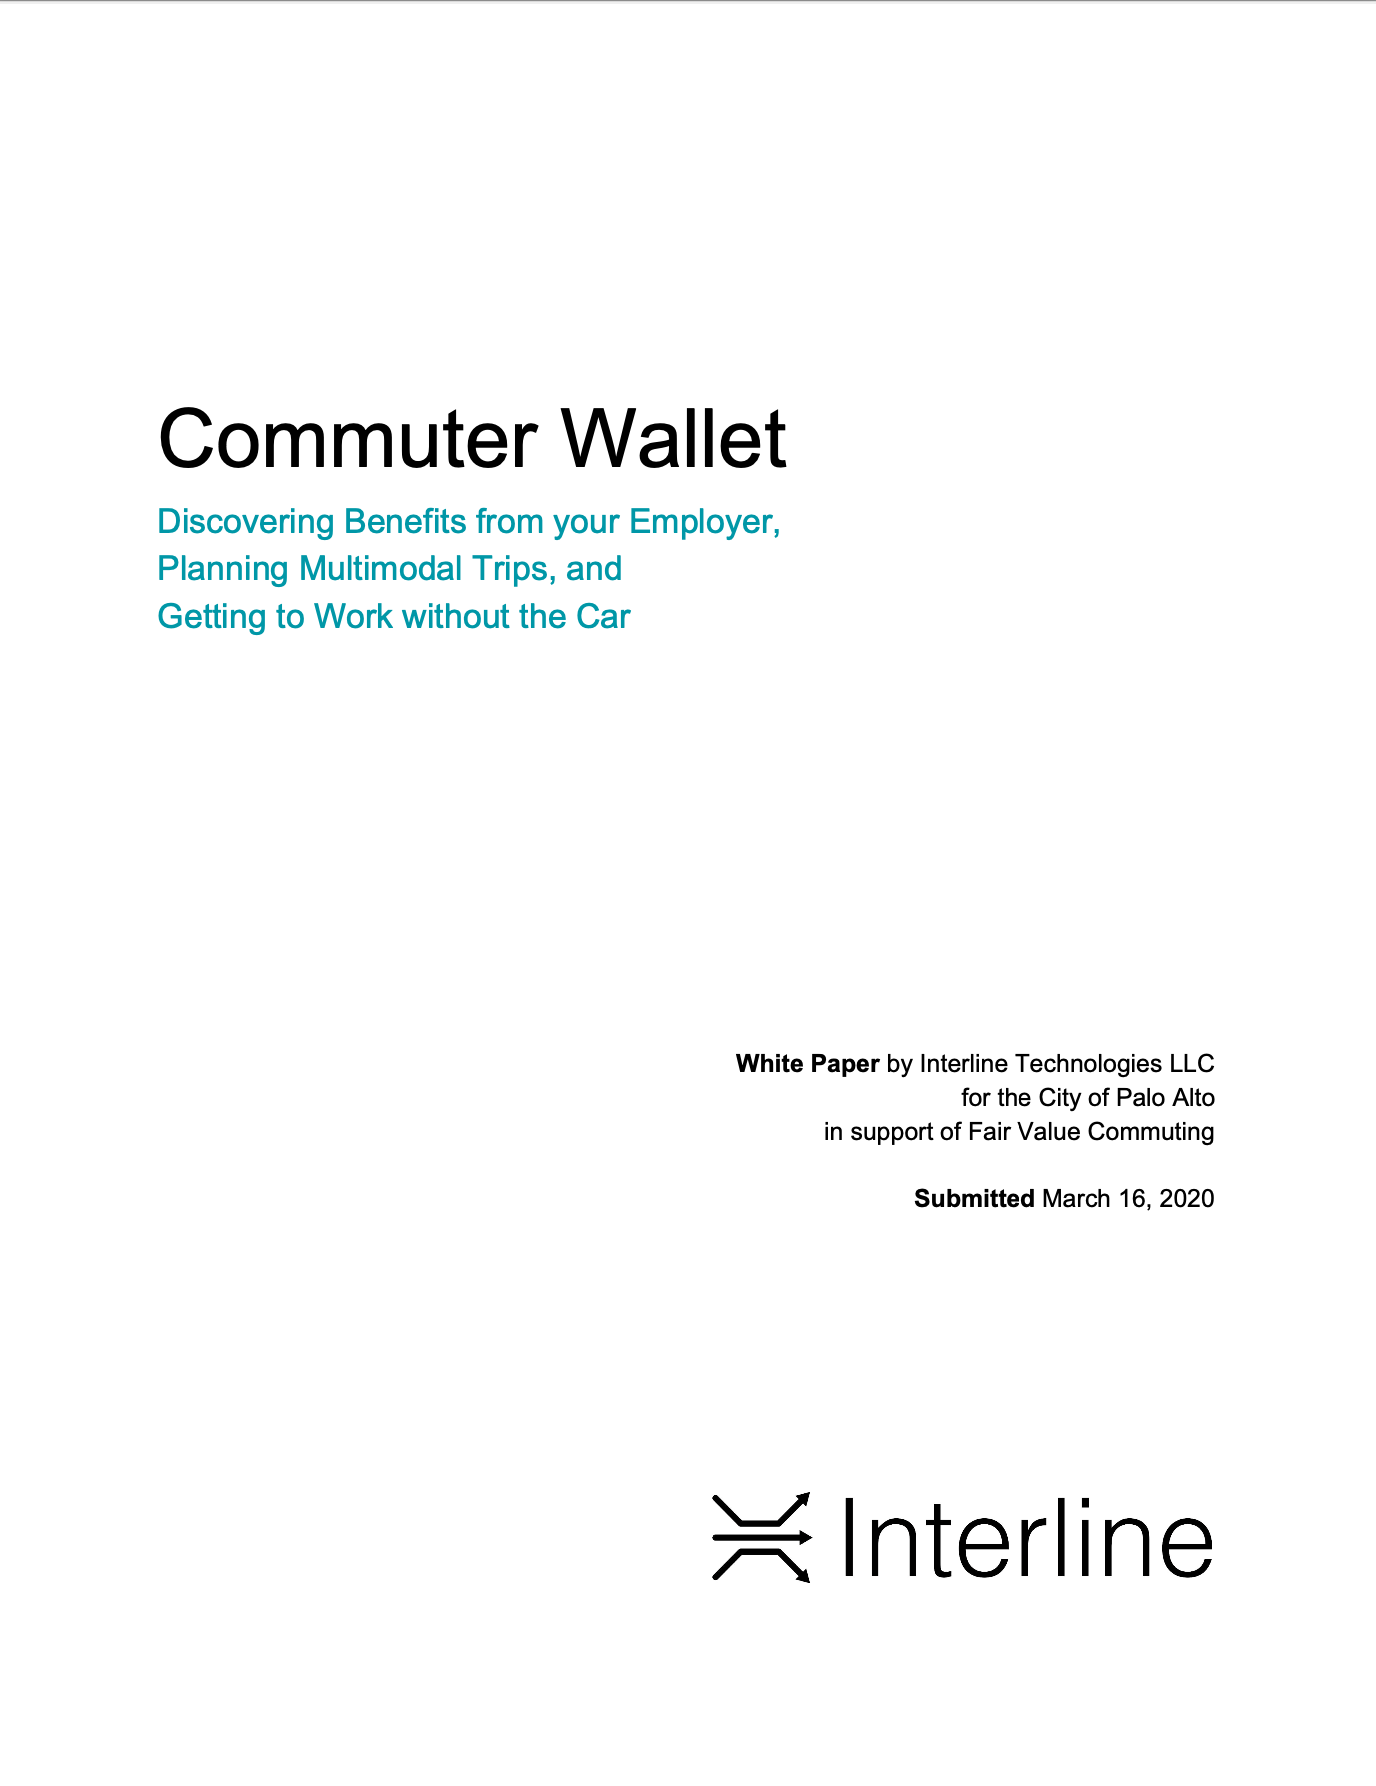 Commuter Wallet report cover